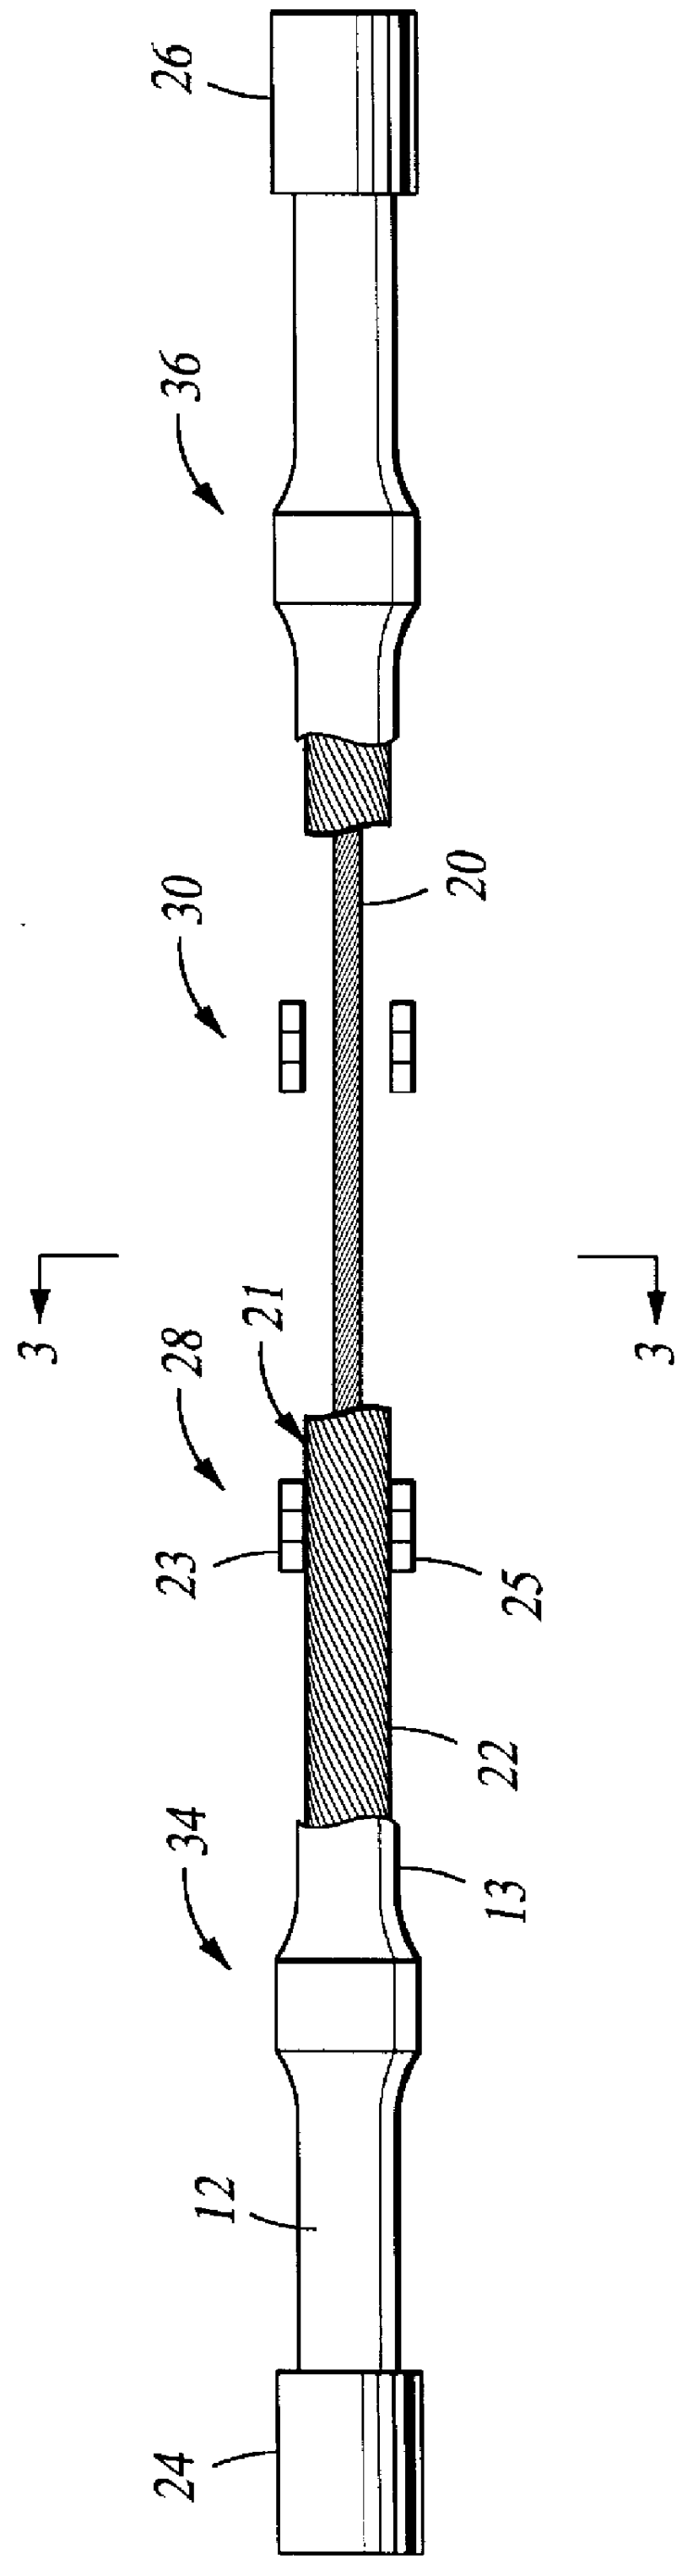 Method for manufacturing a seismic cable